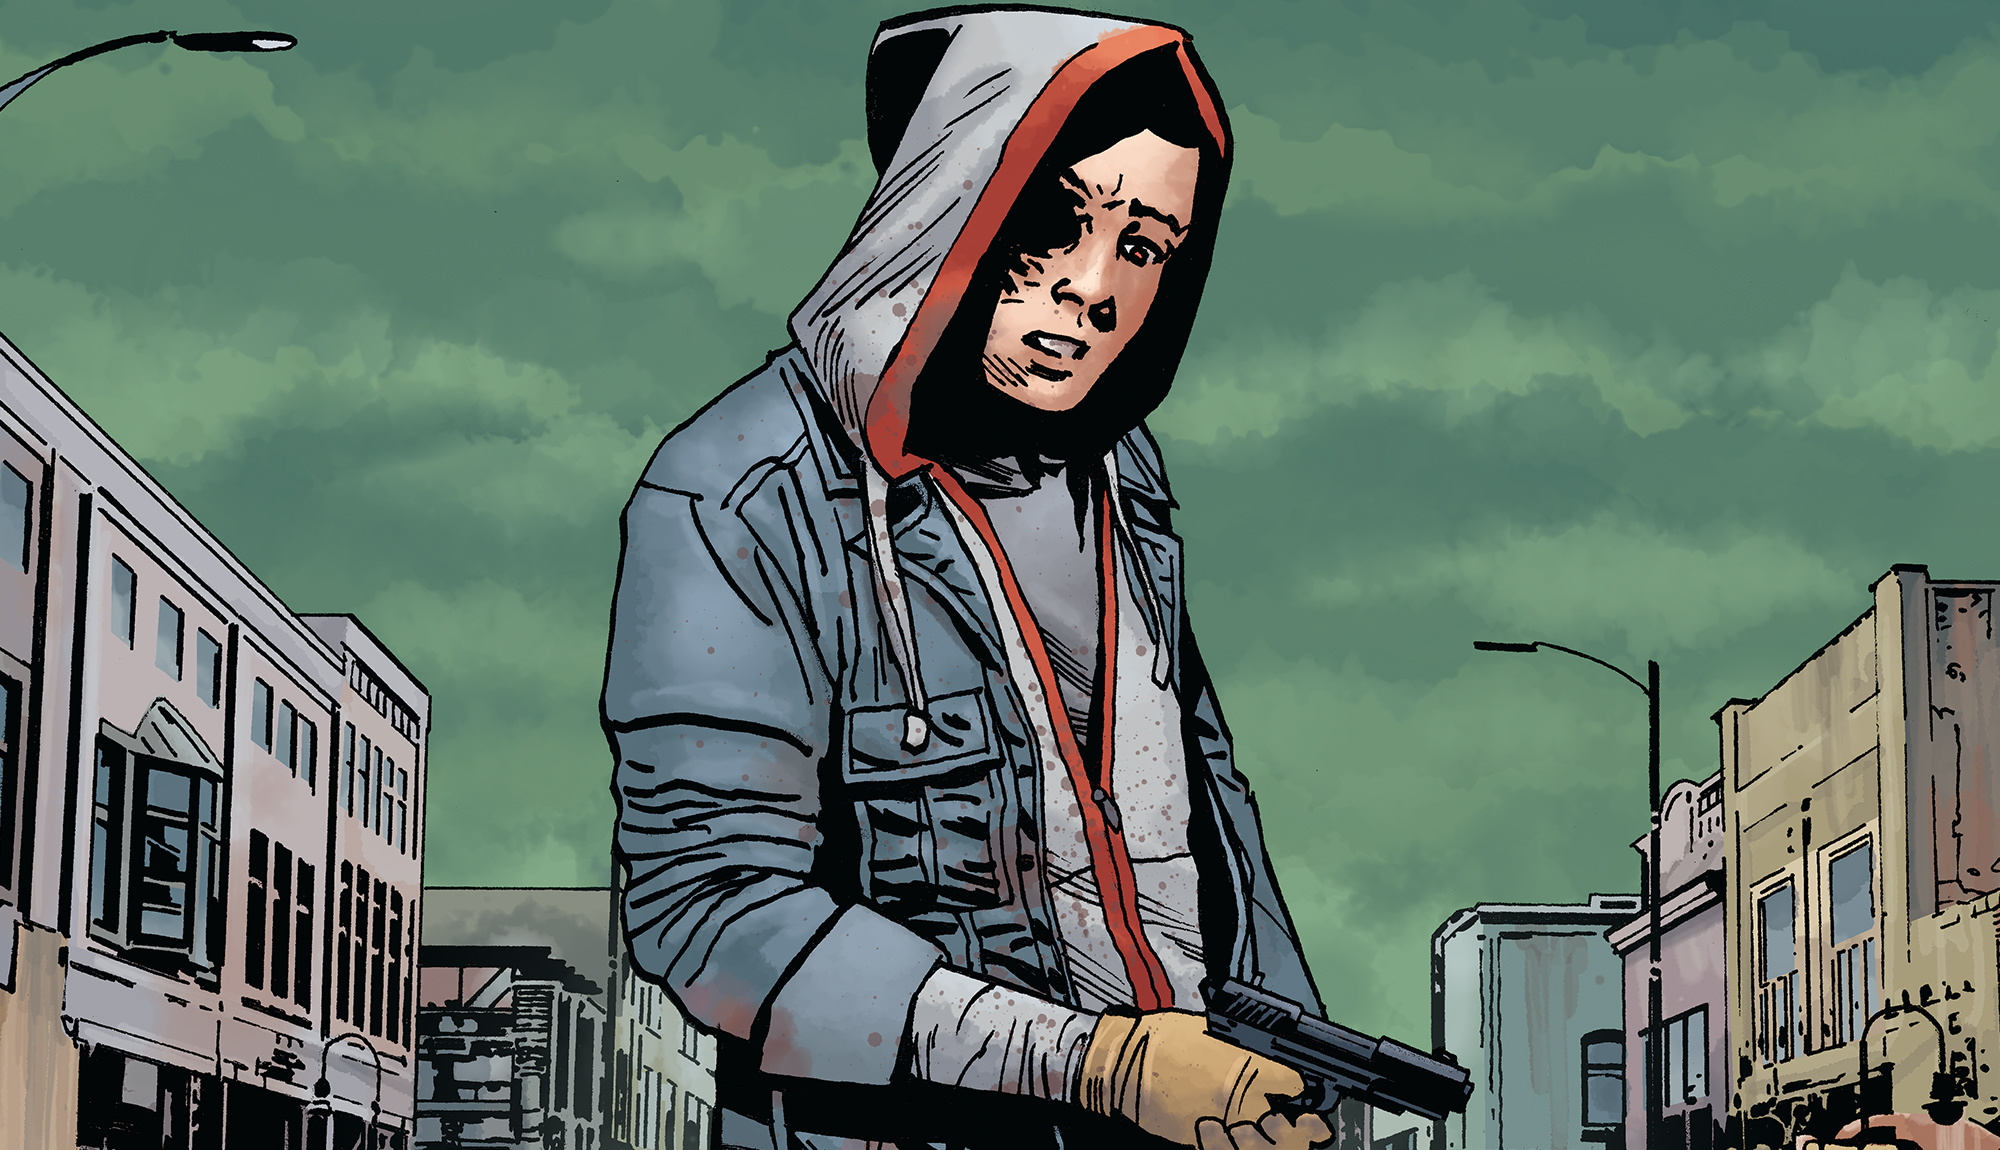 The Walking Dead Issue #192 Cover Shows Carl Looking Despondent